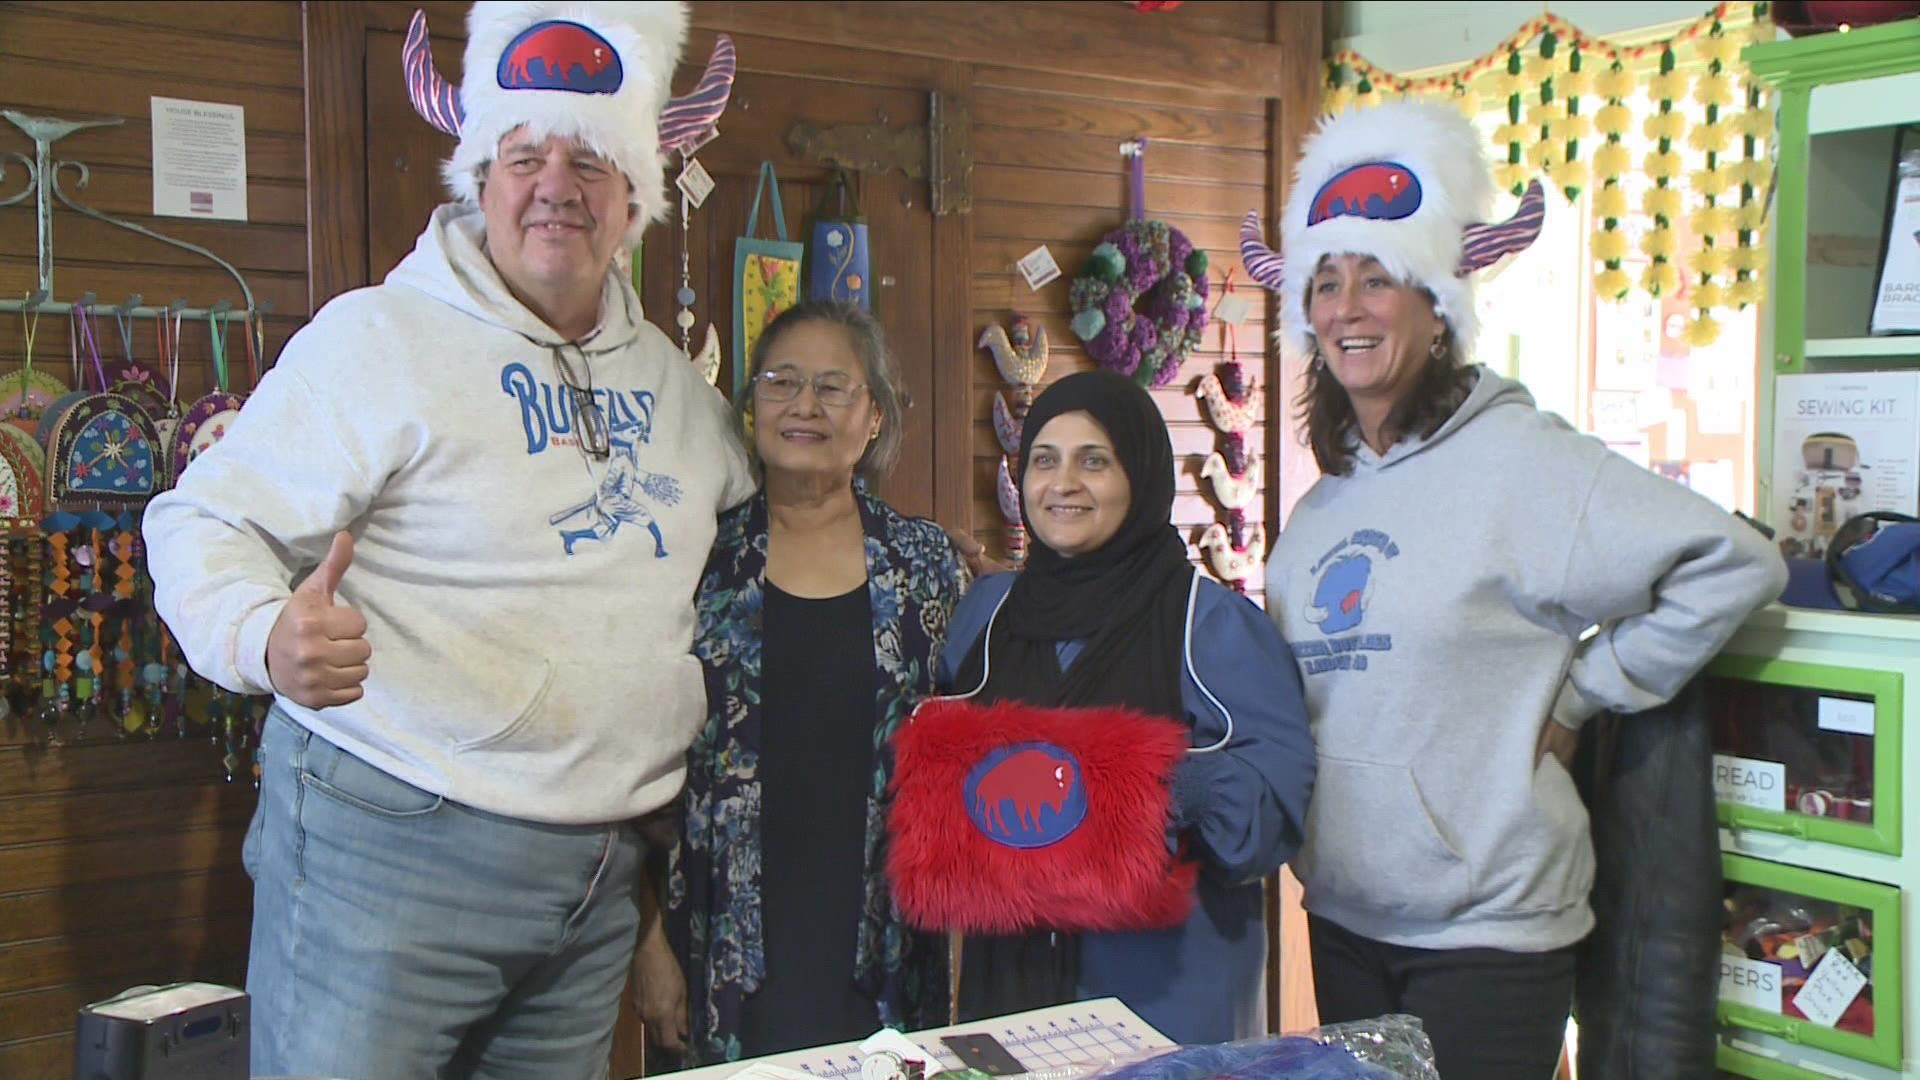 The hats have started to be manufactured locally at the Niagara Street Textile Art Center, which is committed to empowering immigrant and refugee women.